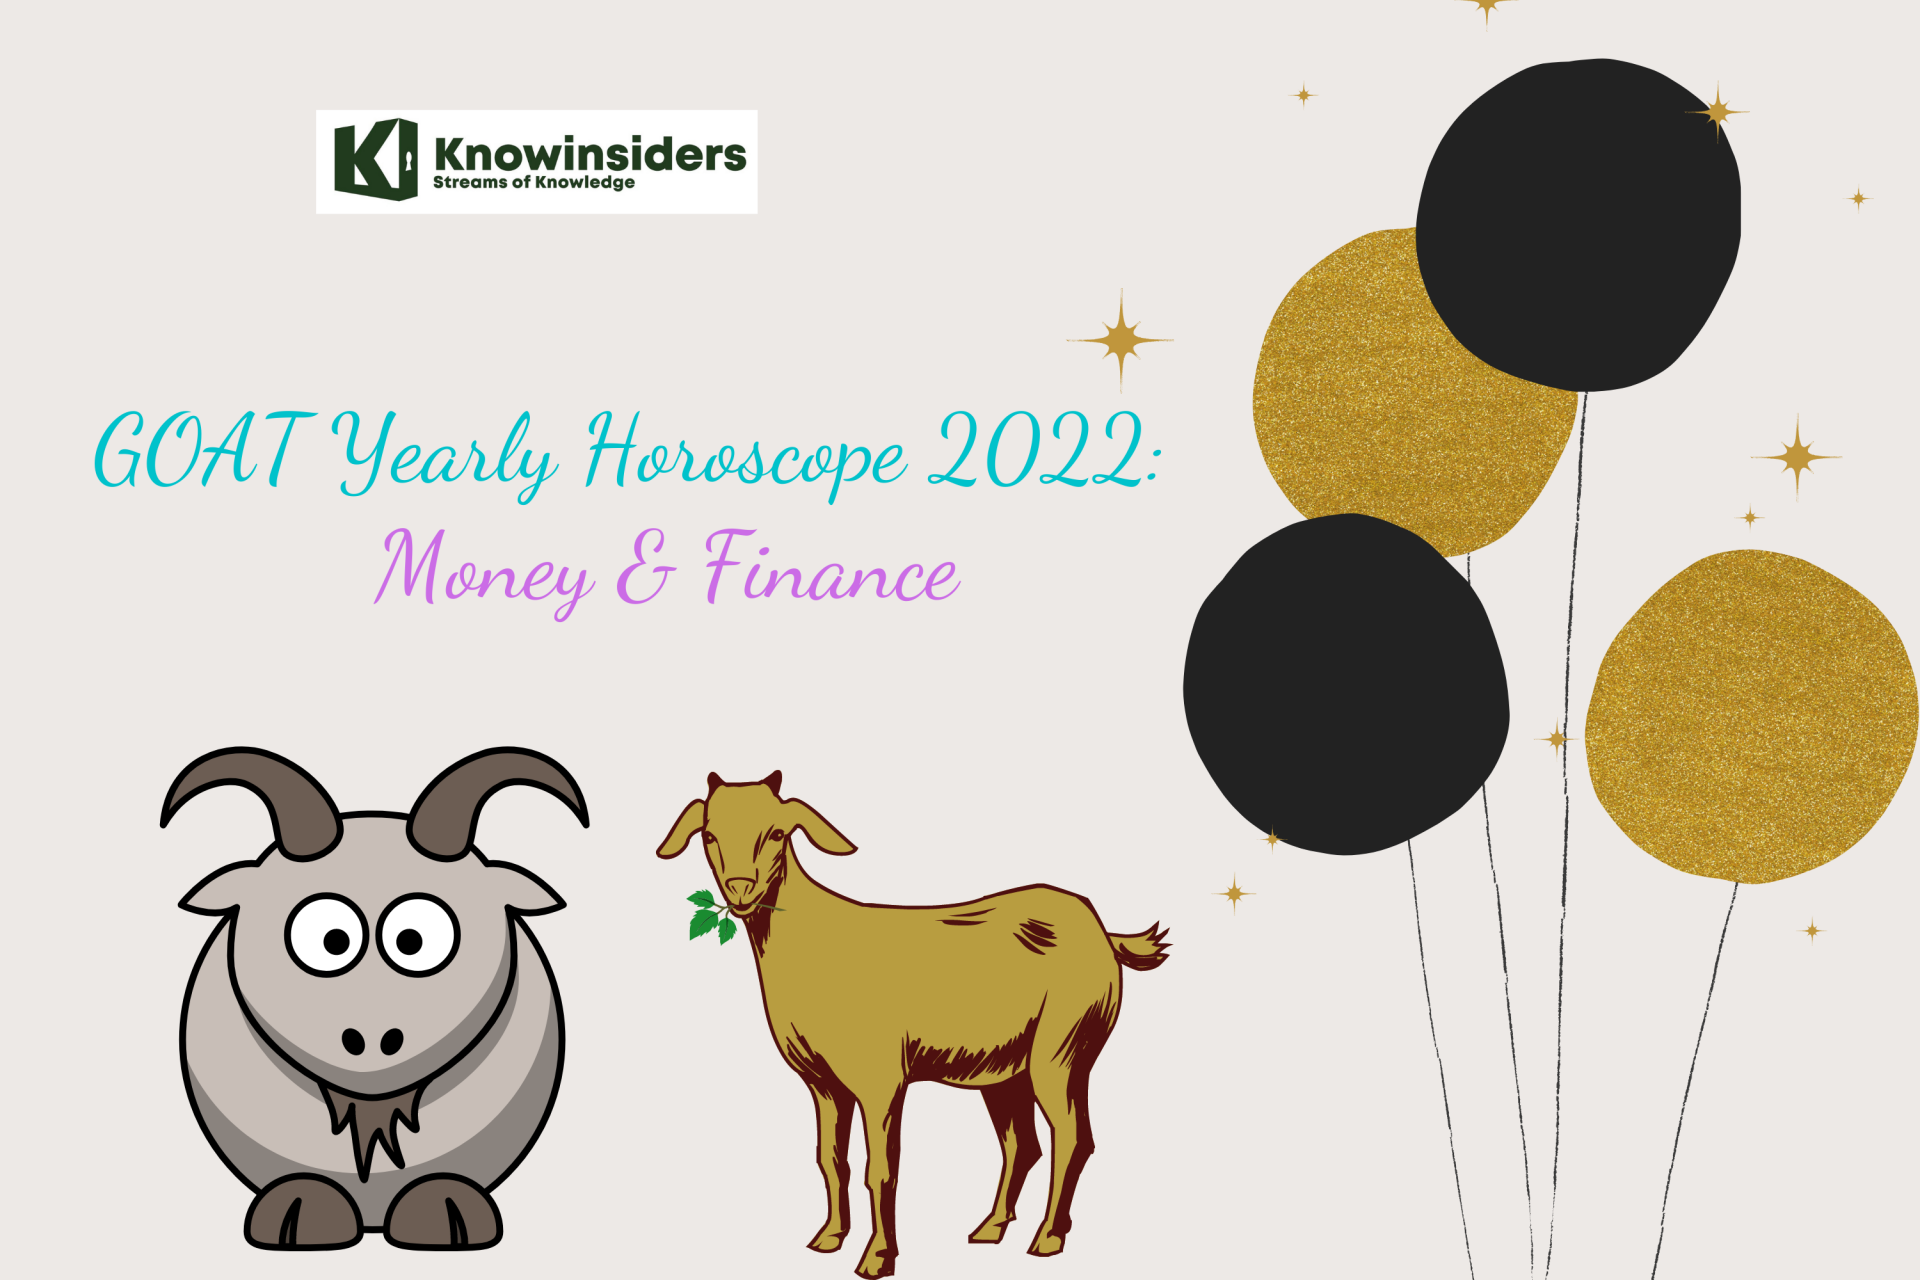 GOAT Yearly Horoscope 2022 – Feng Shui Prediction for Money & Finance